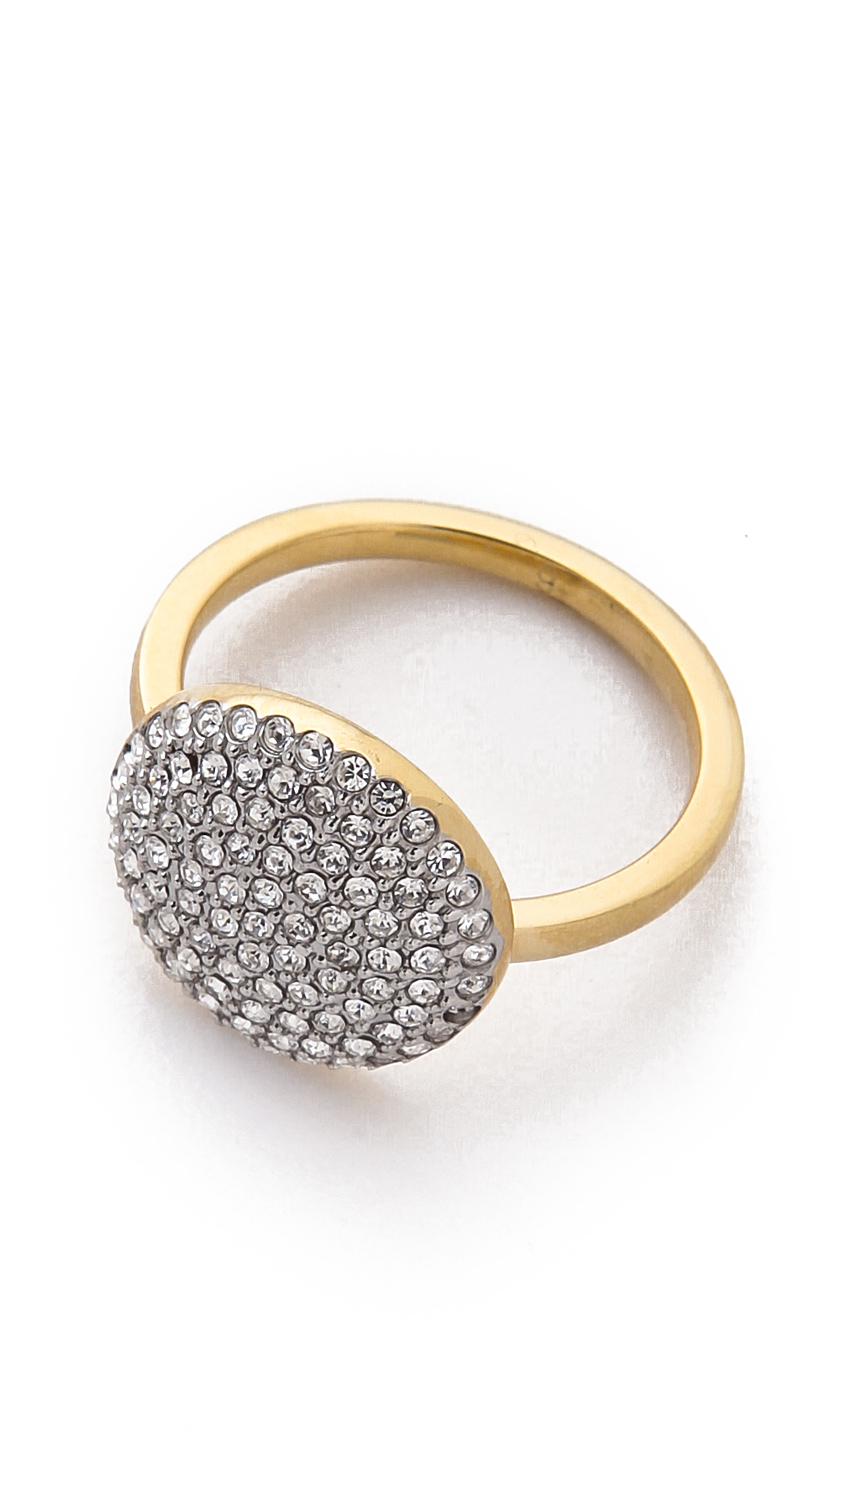 Michael Kors Pave Disc Ring - Clear/Gold in Metallic - Lyst